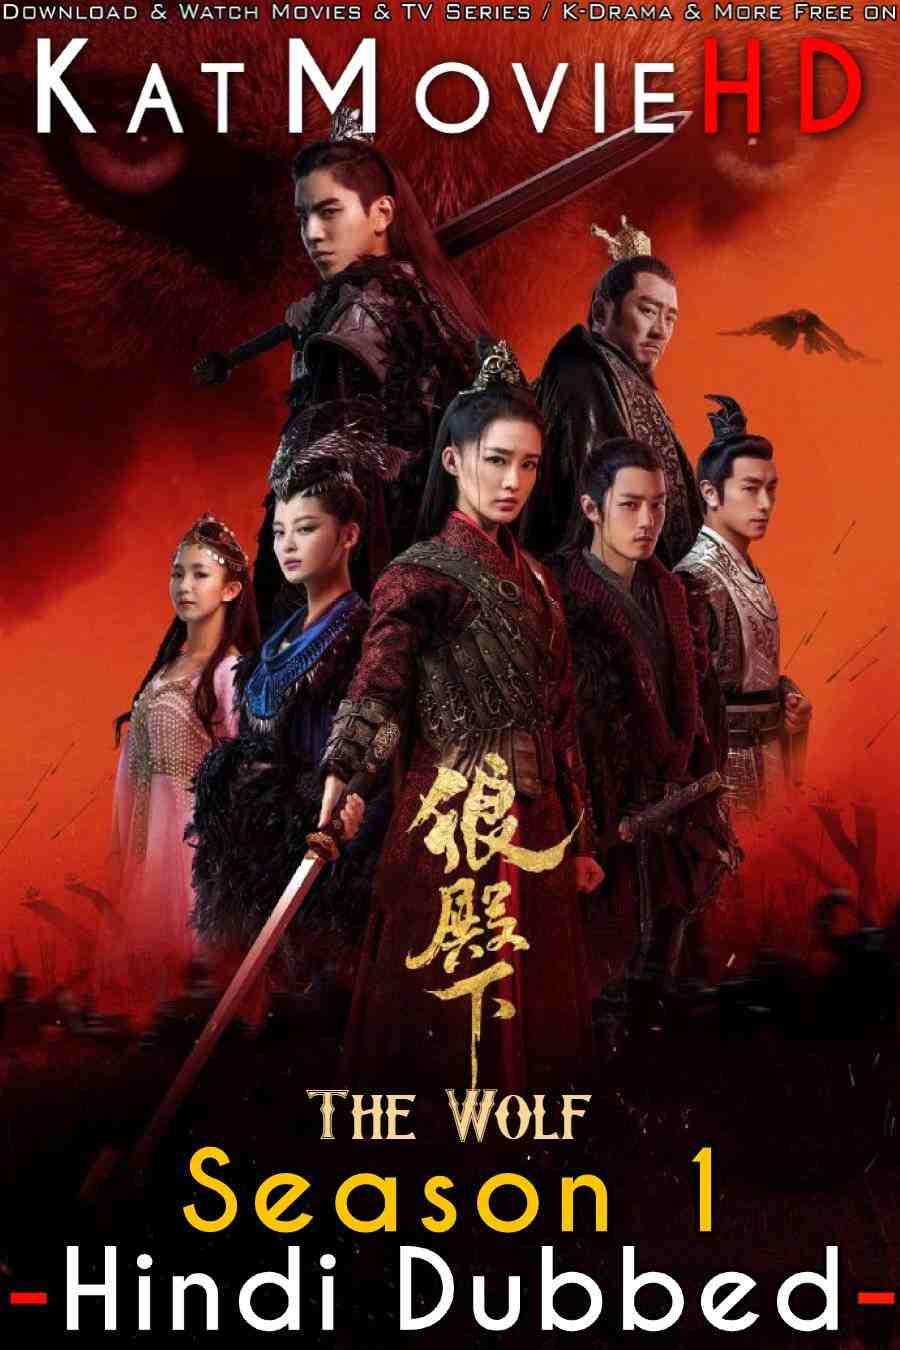 Download The Wolf (2020) In Hindi 480p & 720p HDRip (Chinese: Láng diànxià) Chinese Drama Hindi Dubbed] ) [ The Wolf Season 1 All Episodes] Free Download on katmoviehd.yt